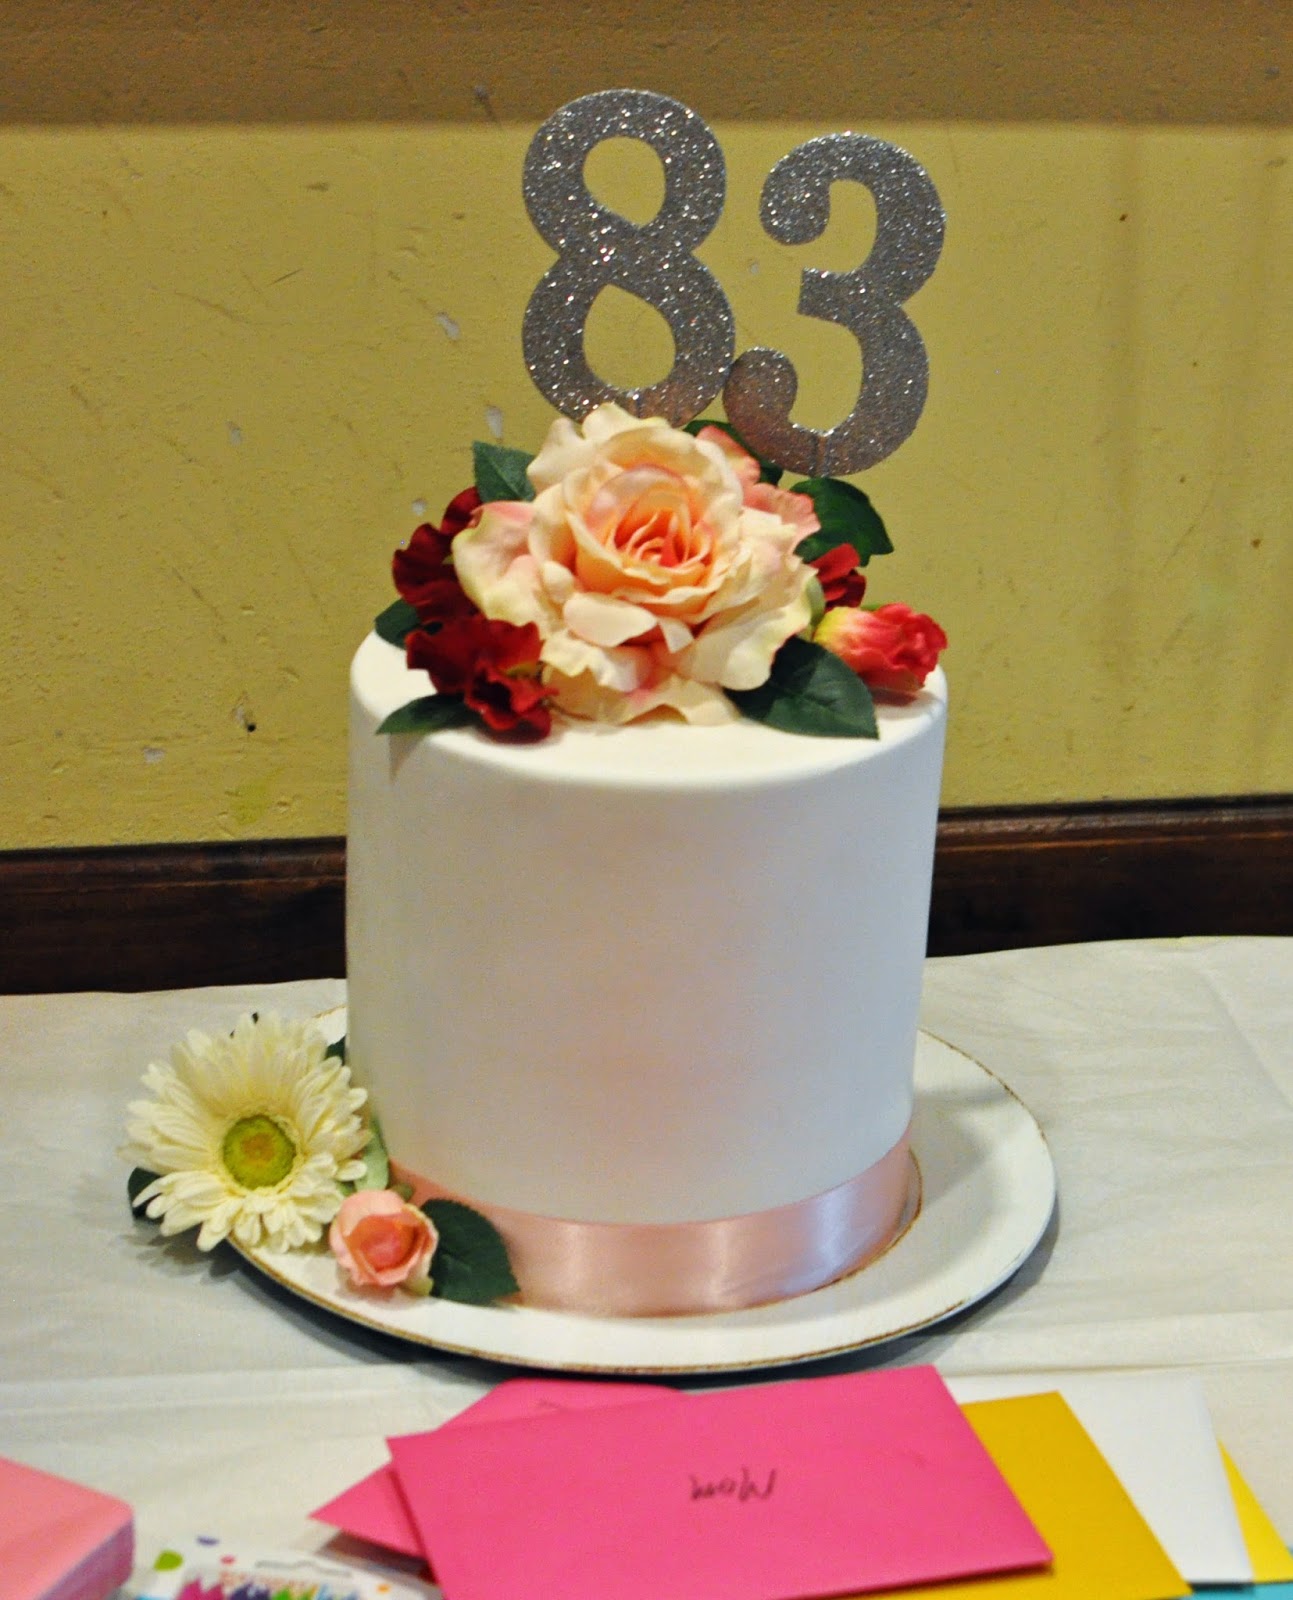 How to Use Acrylic Cake Disks - Cake by Courtney